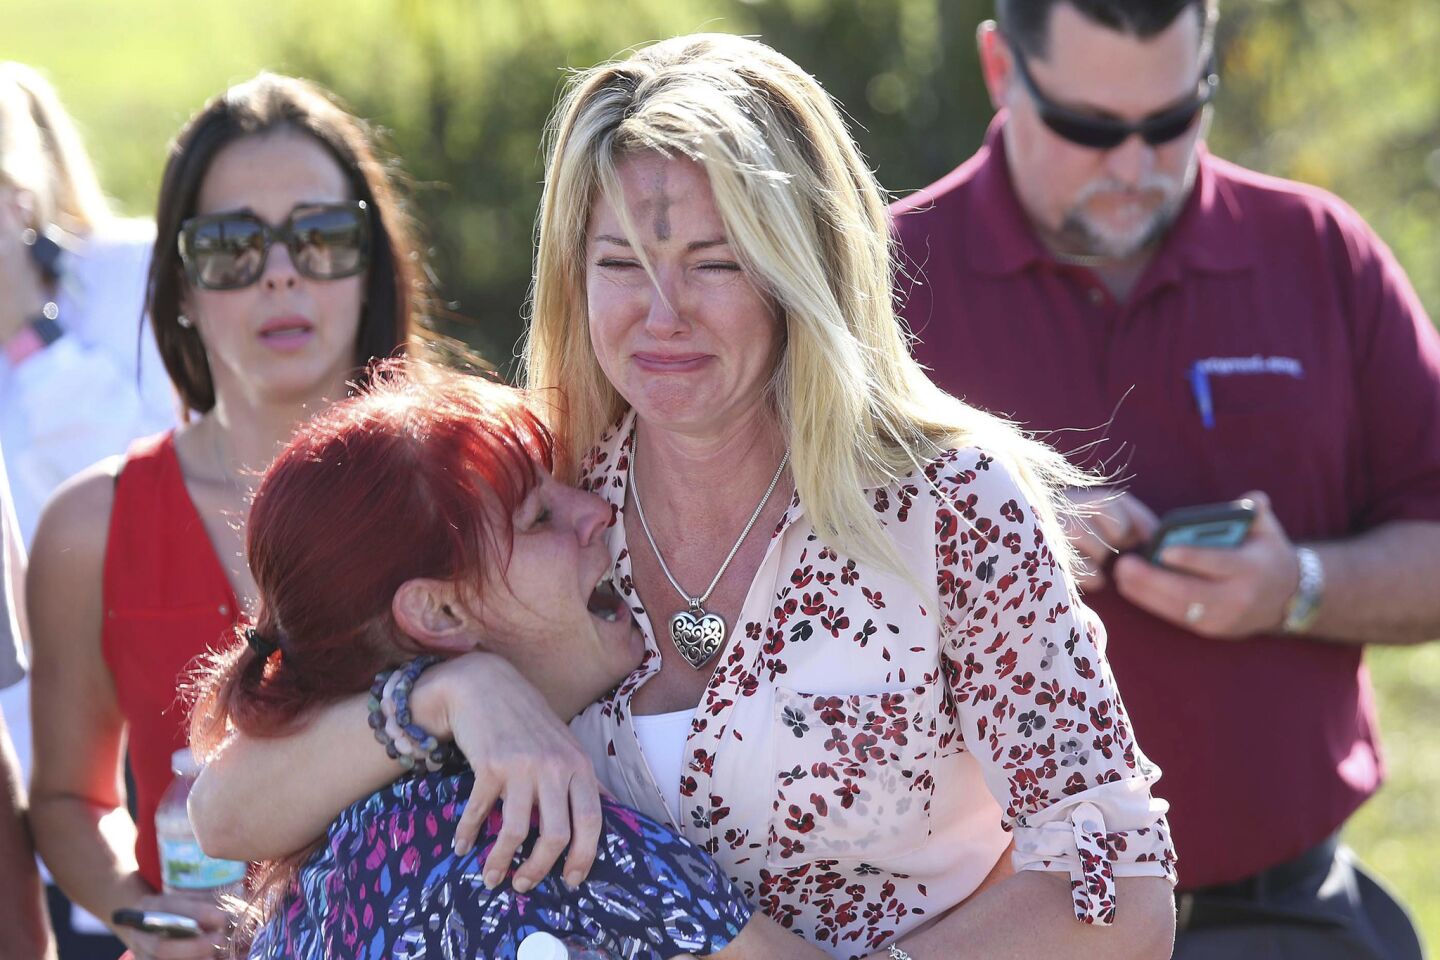 Parents wait for news after a shooting at Marjory Stoneman Douglas High School in Parkland, Fla., on Wednesday.